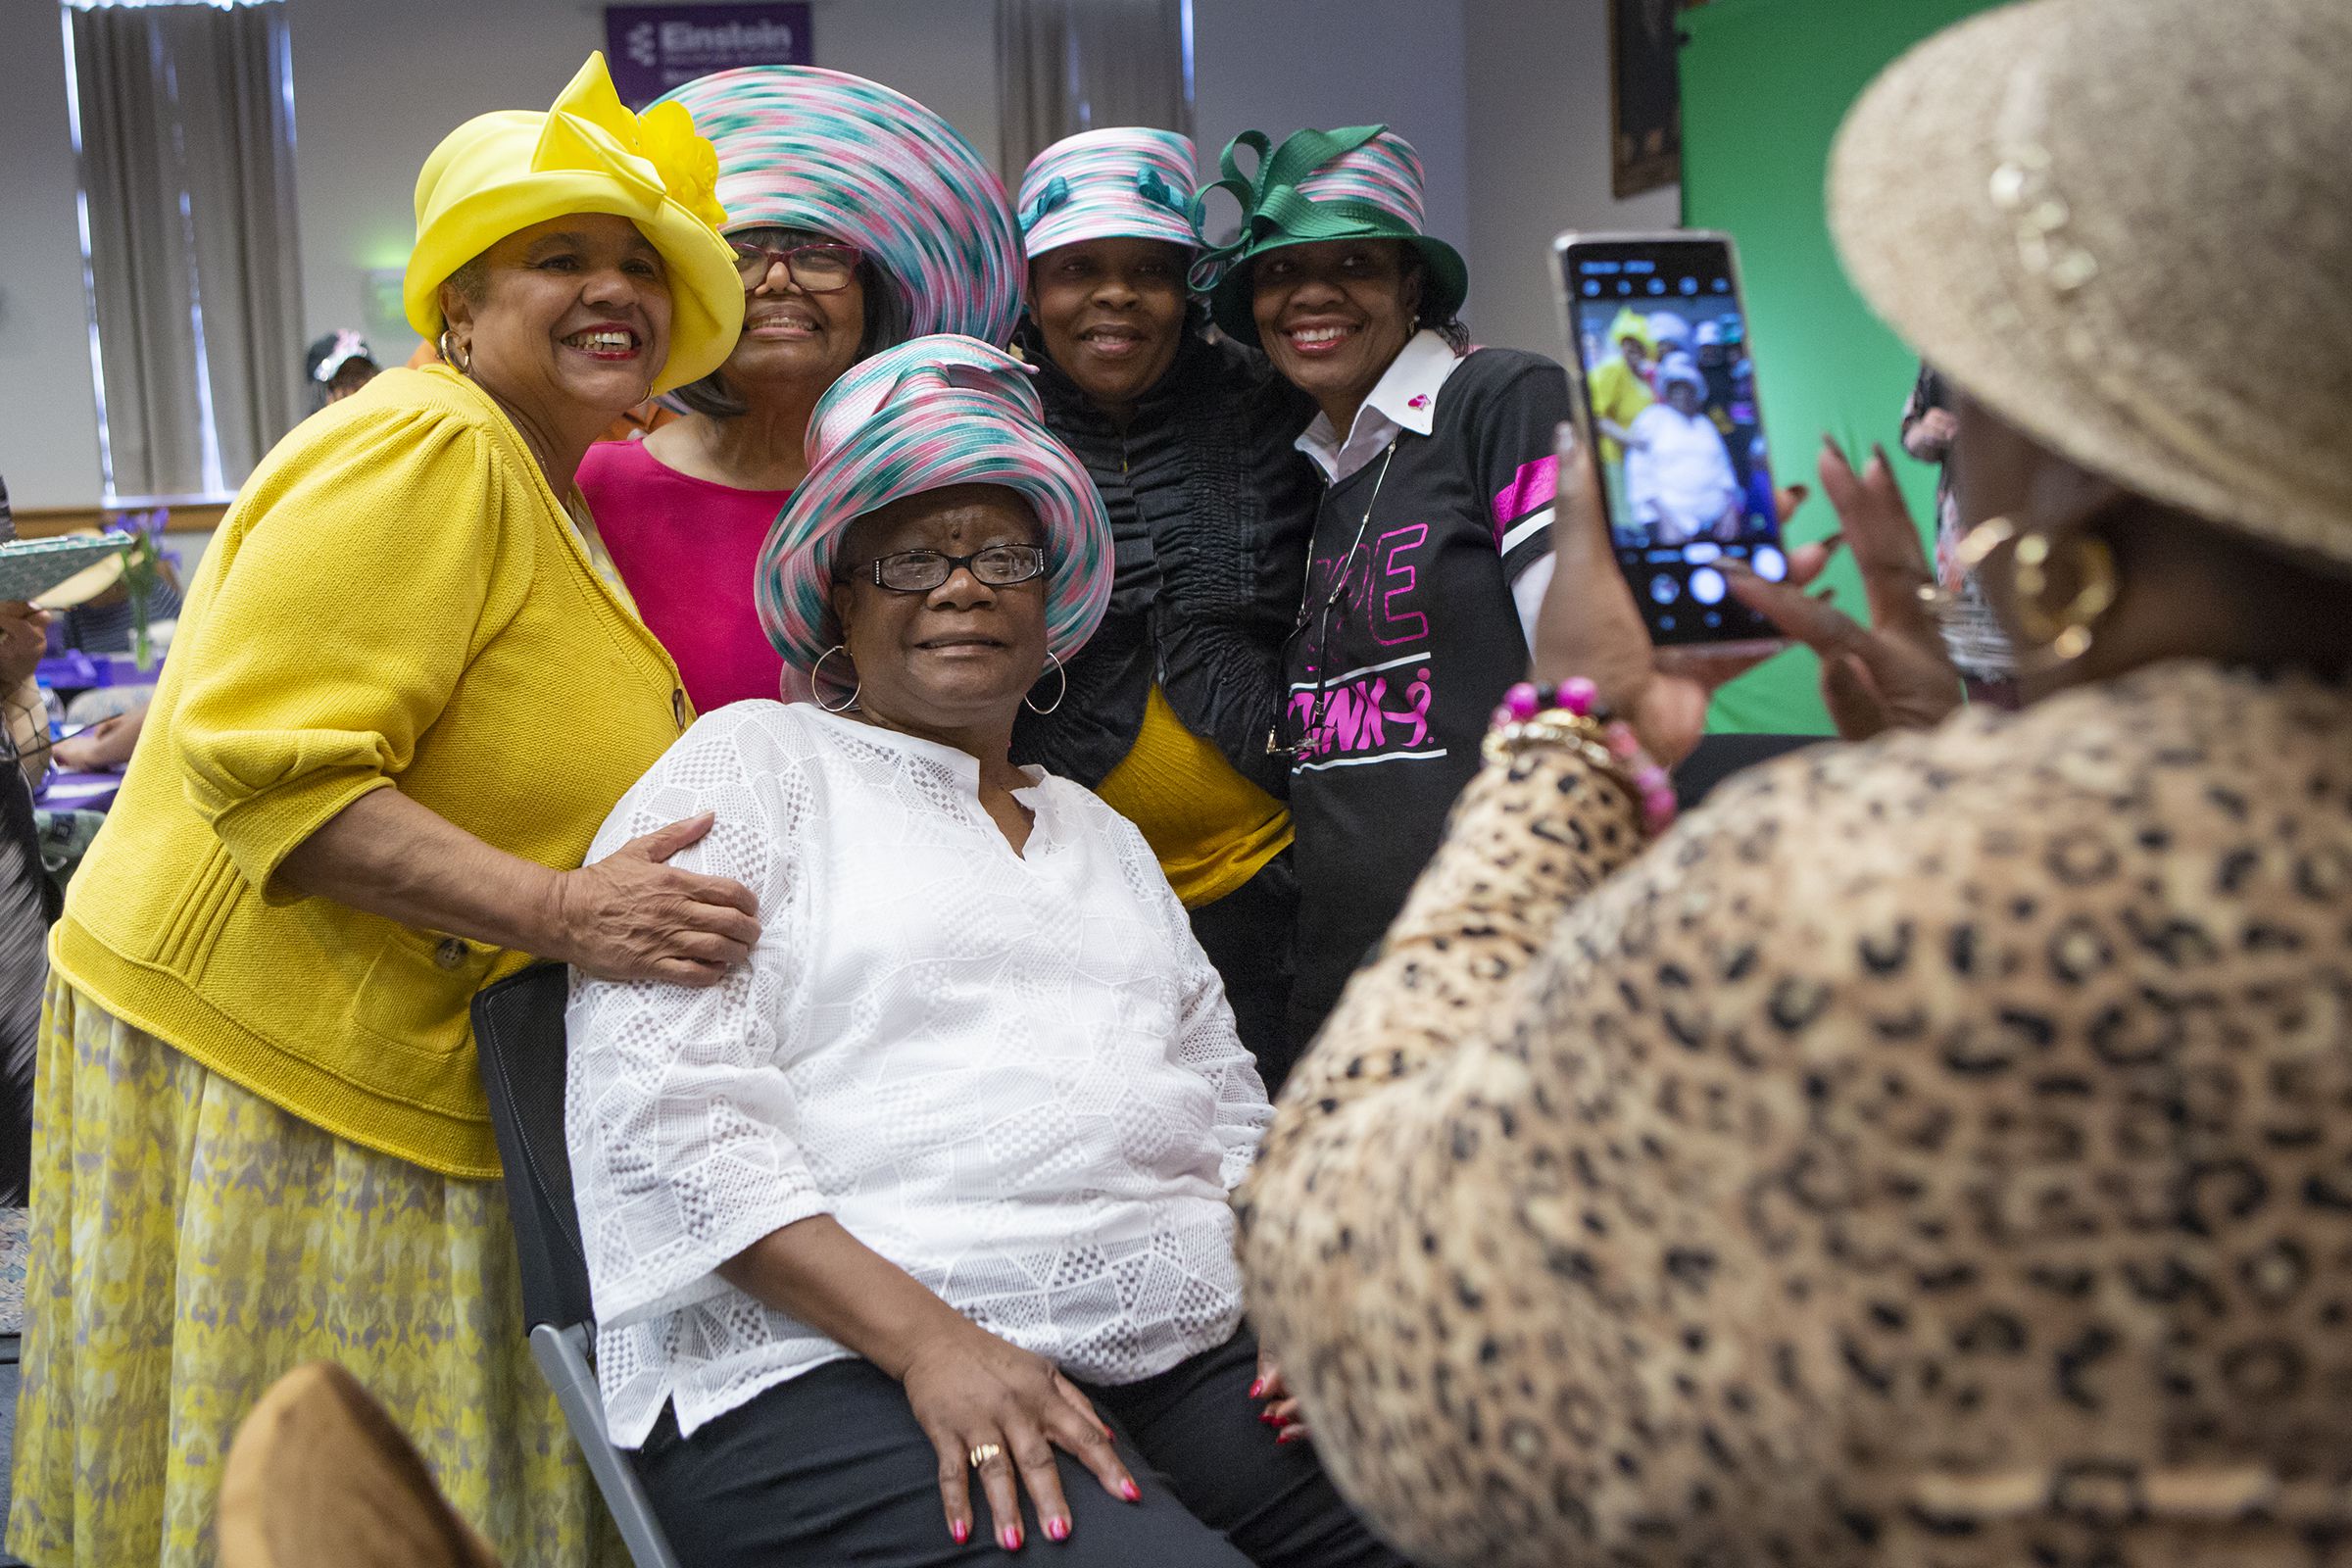 She beat cancer twice and saved a historic Philly hat factory. Now, she's  tipping her hat to survivors